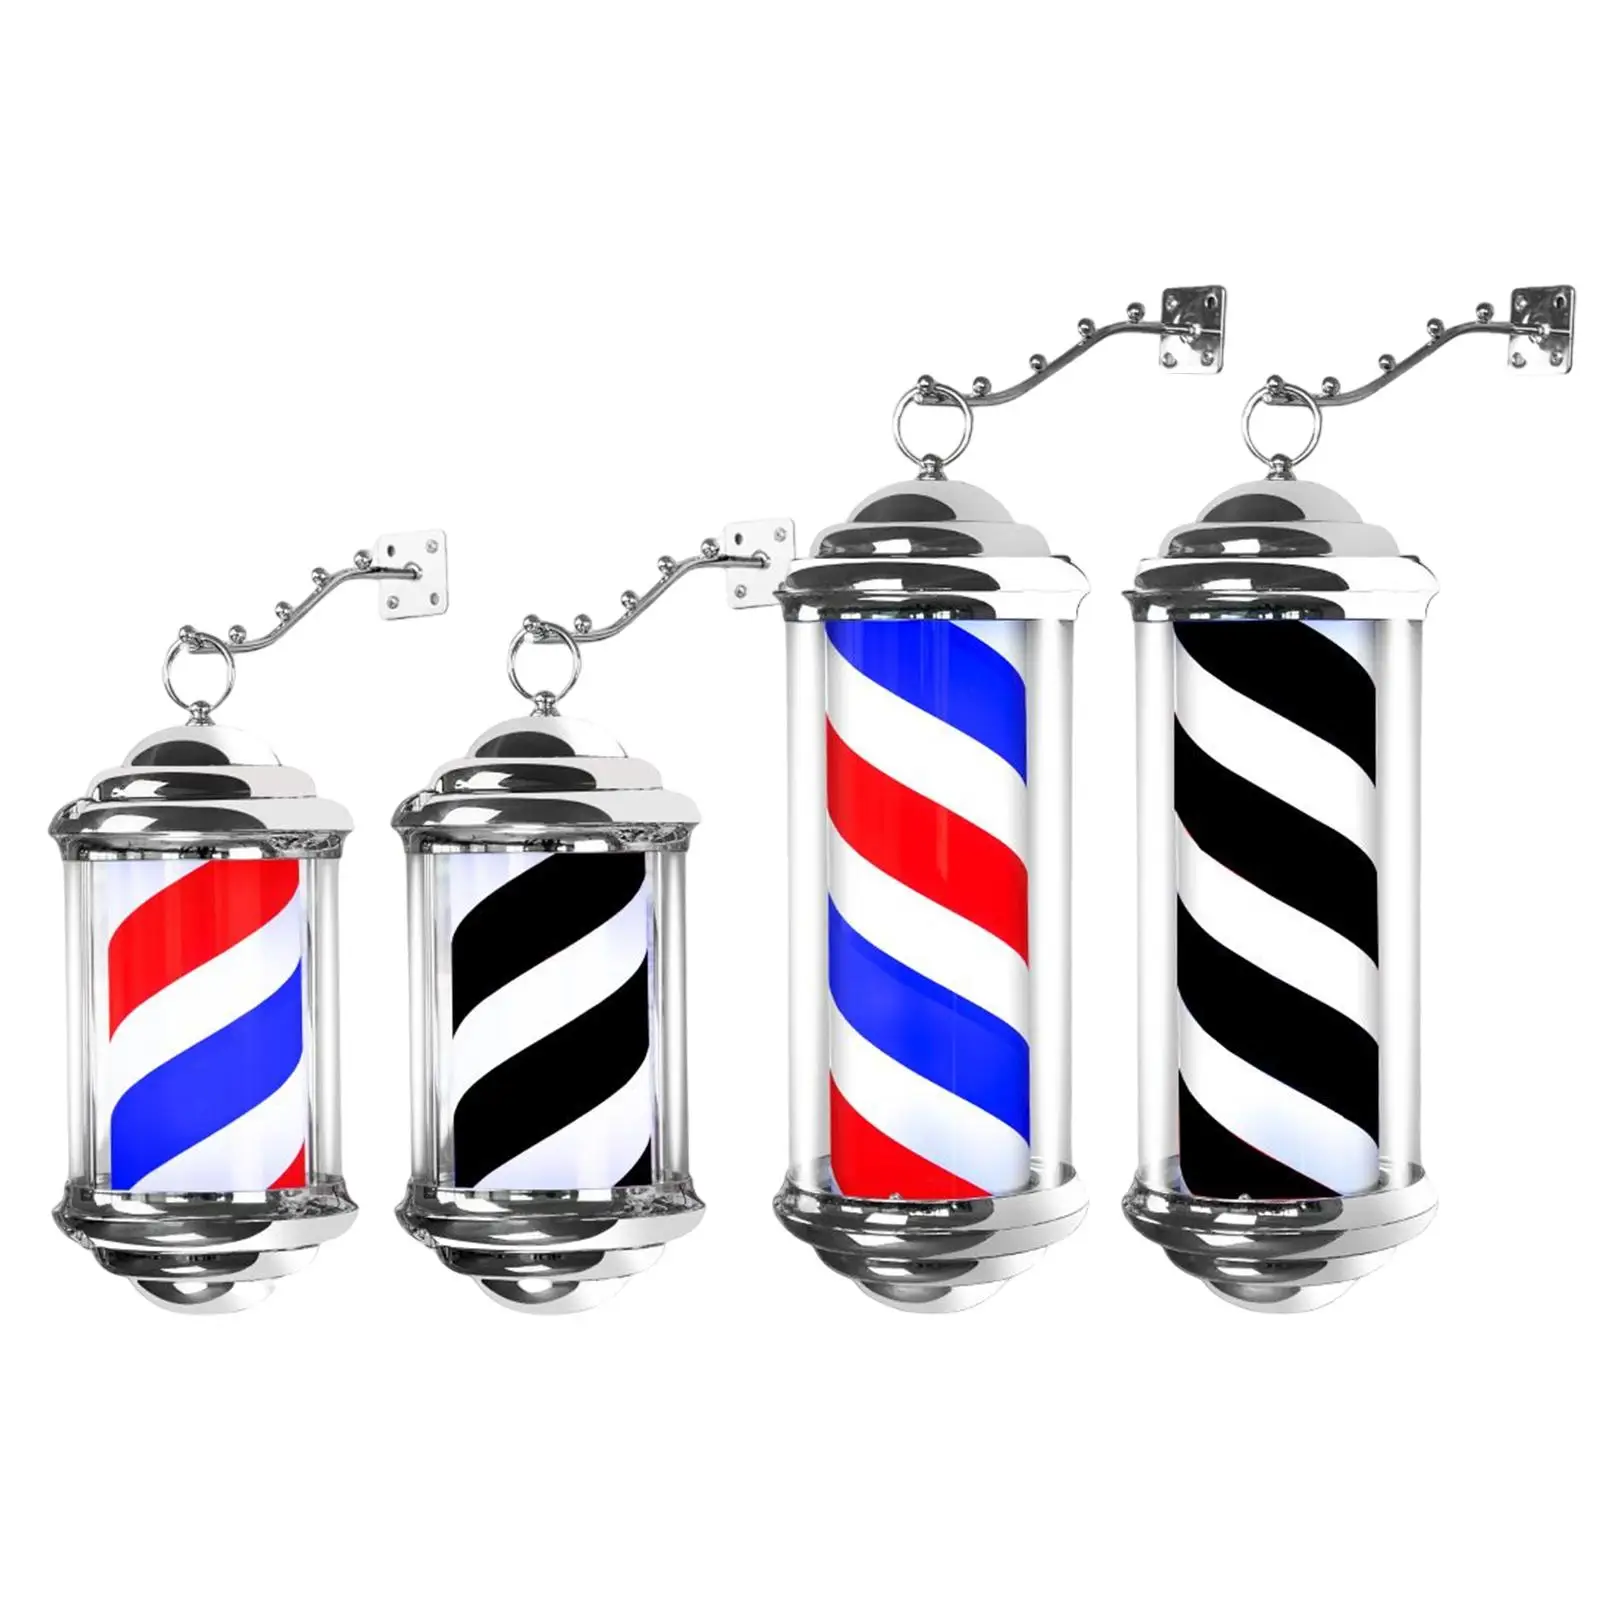 Retro Style Barber Pole Light Rotating Salon Sign Light Barber Pole Stand Lamp for Indoor